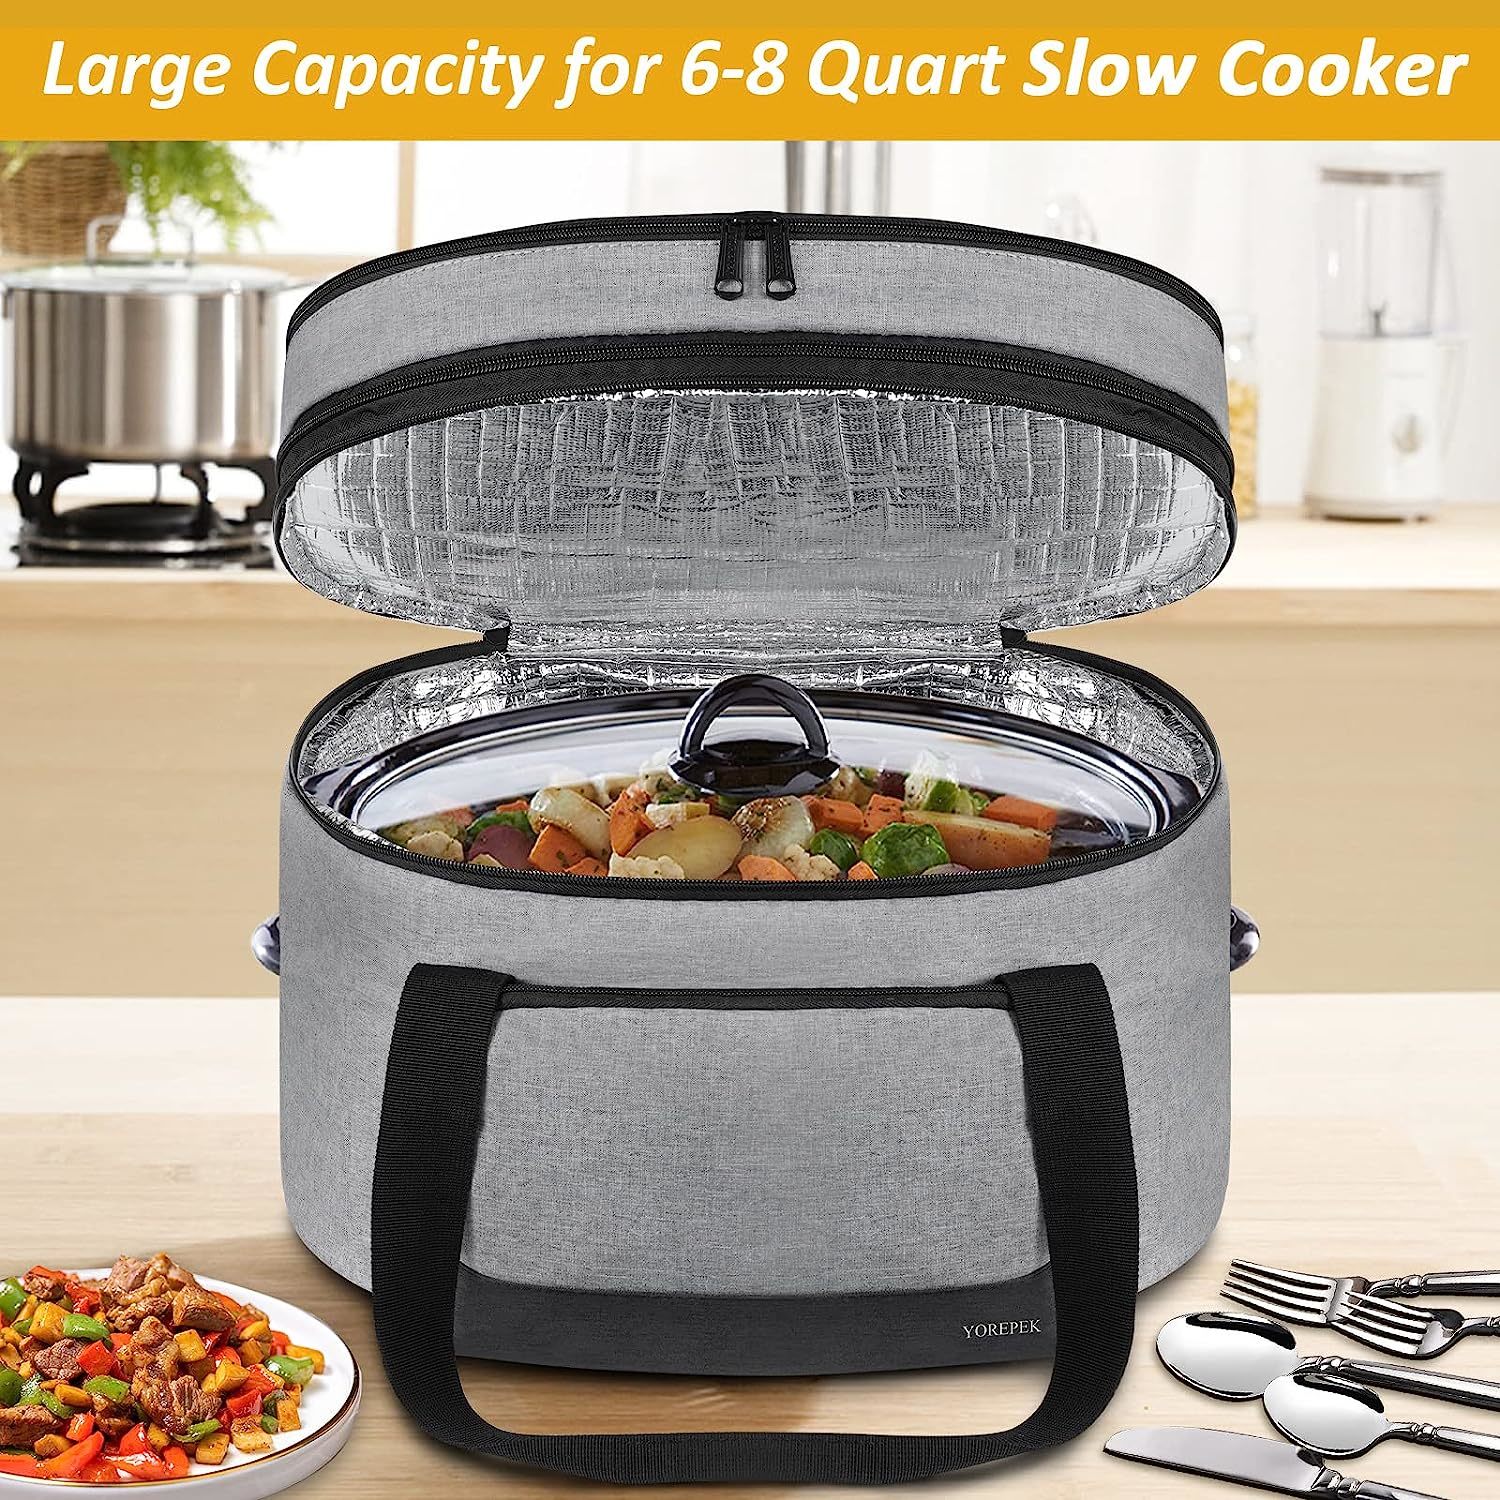 2 Pack Slow Cooker Liners - Reusable Cooker Divider, Silicone Cooking Bags  Fit 6 Quarts Pot (grey+p